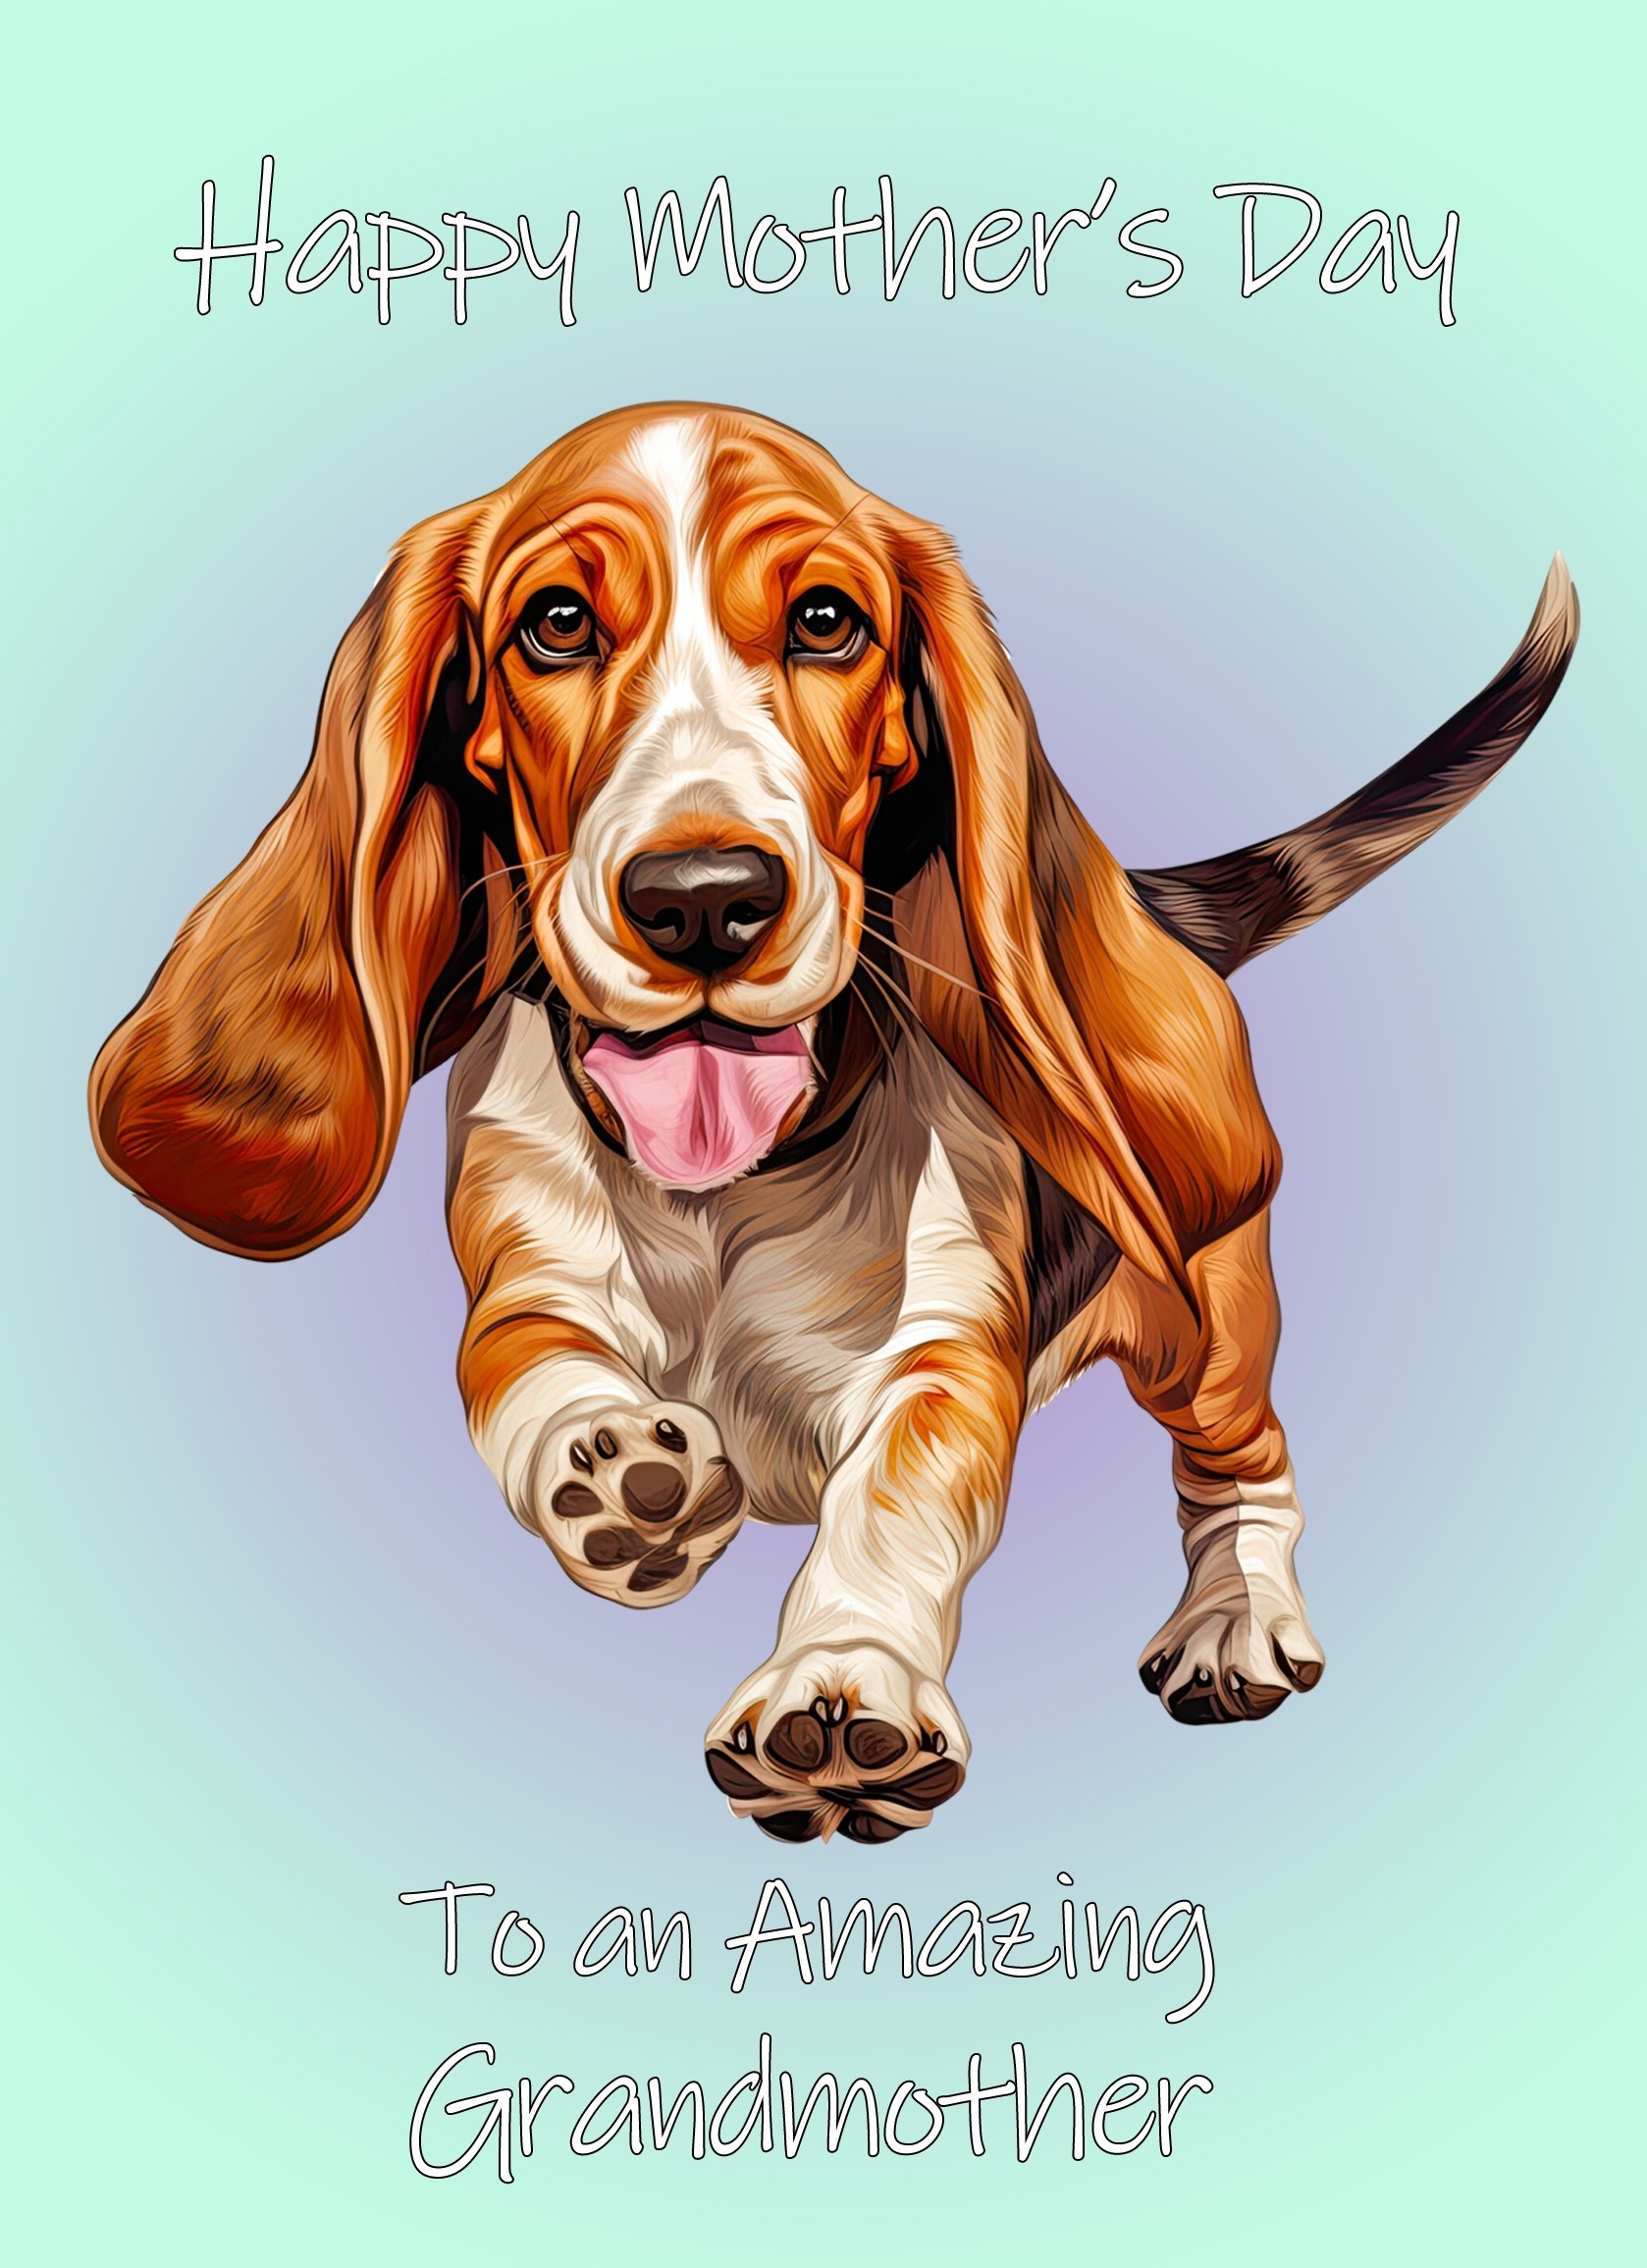 Basset Hound Dog Mothers Day Card For Grandmother